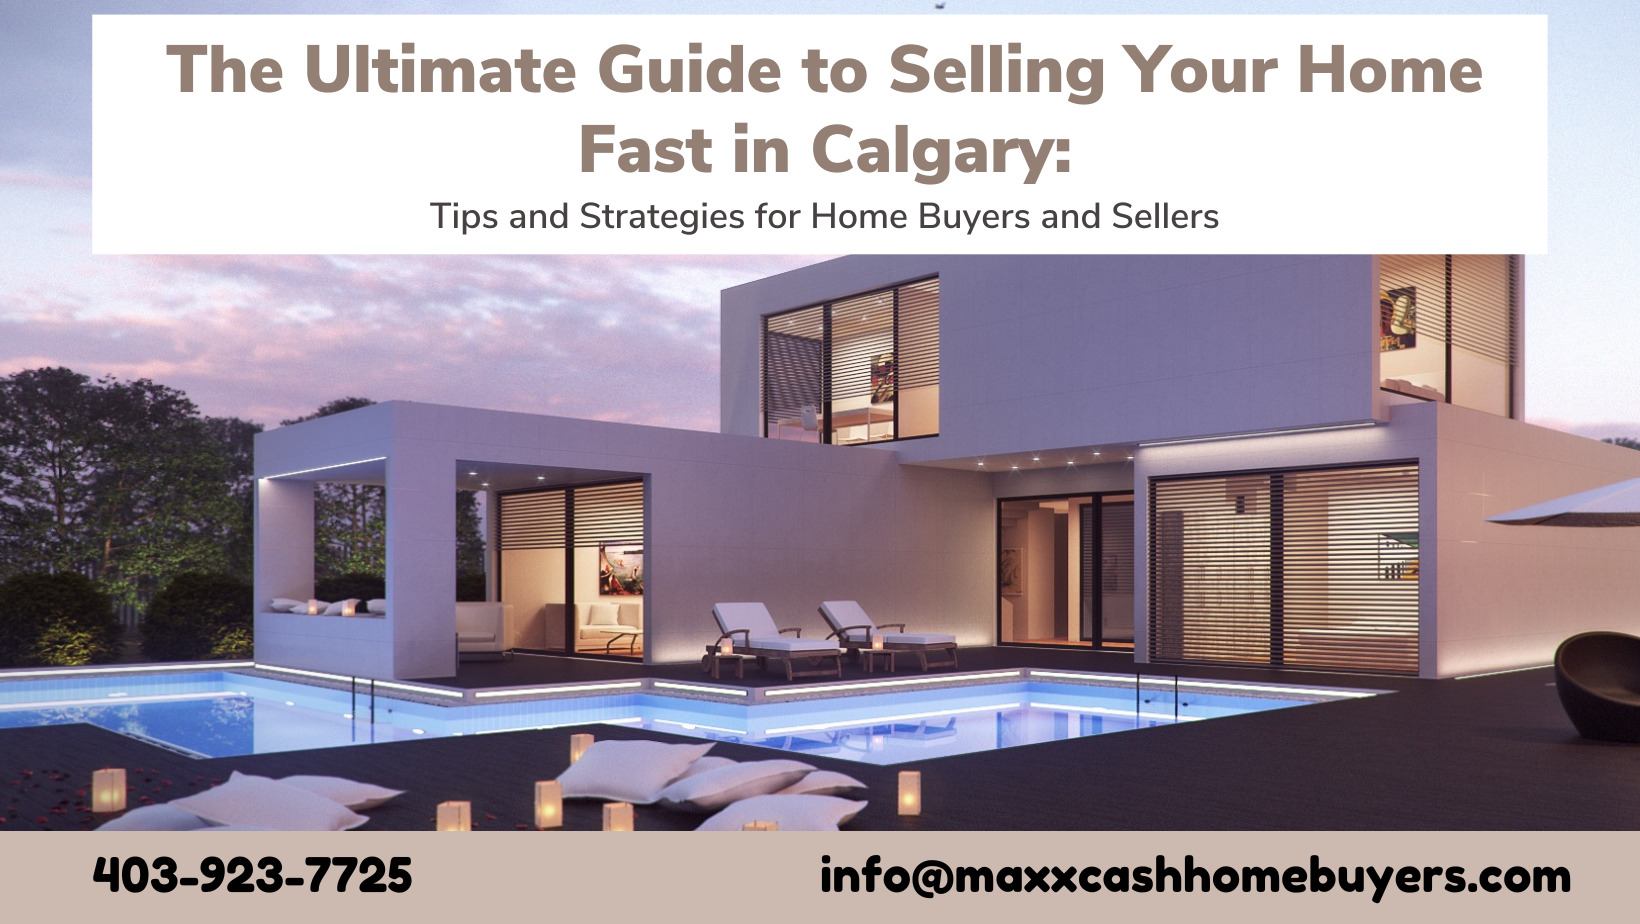 The Ultimate Guide to Selling Your Home Fast in Calgary Tips and Strategies for Home Buyers and Sellers